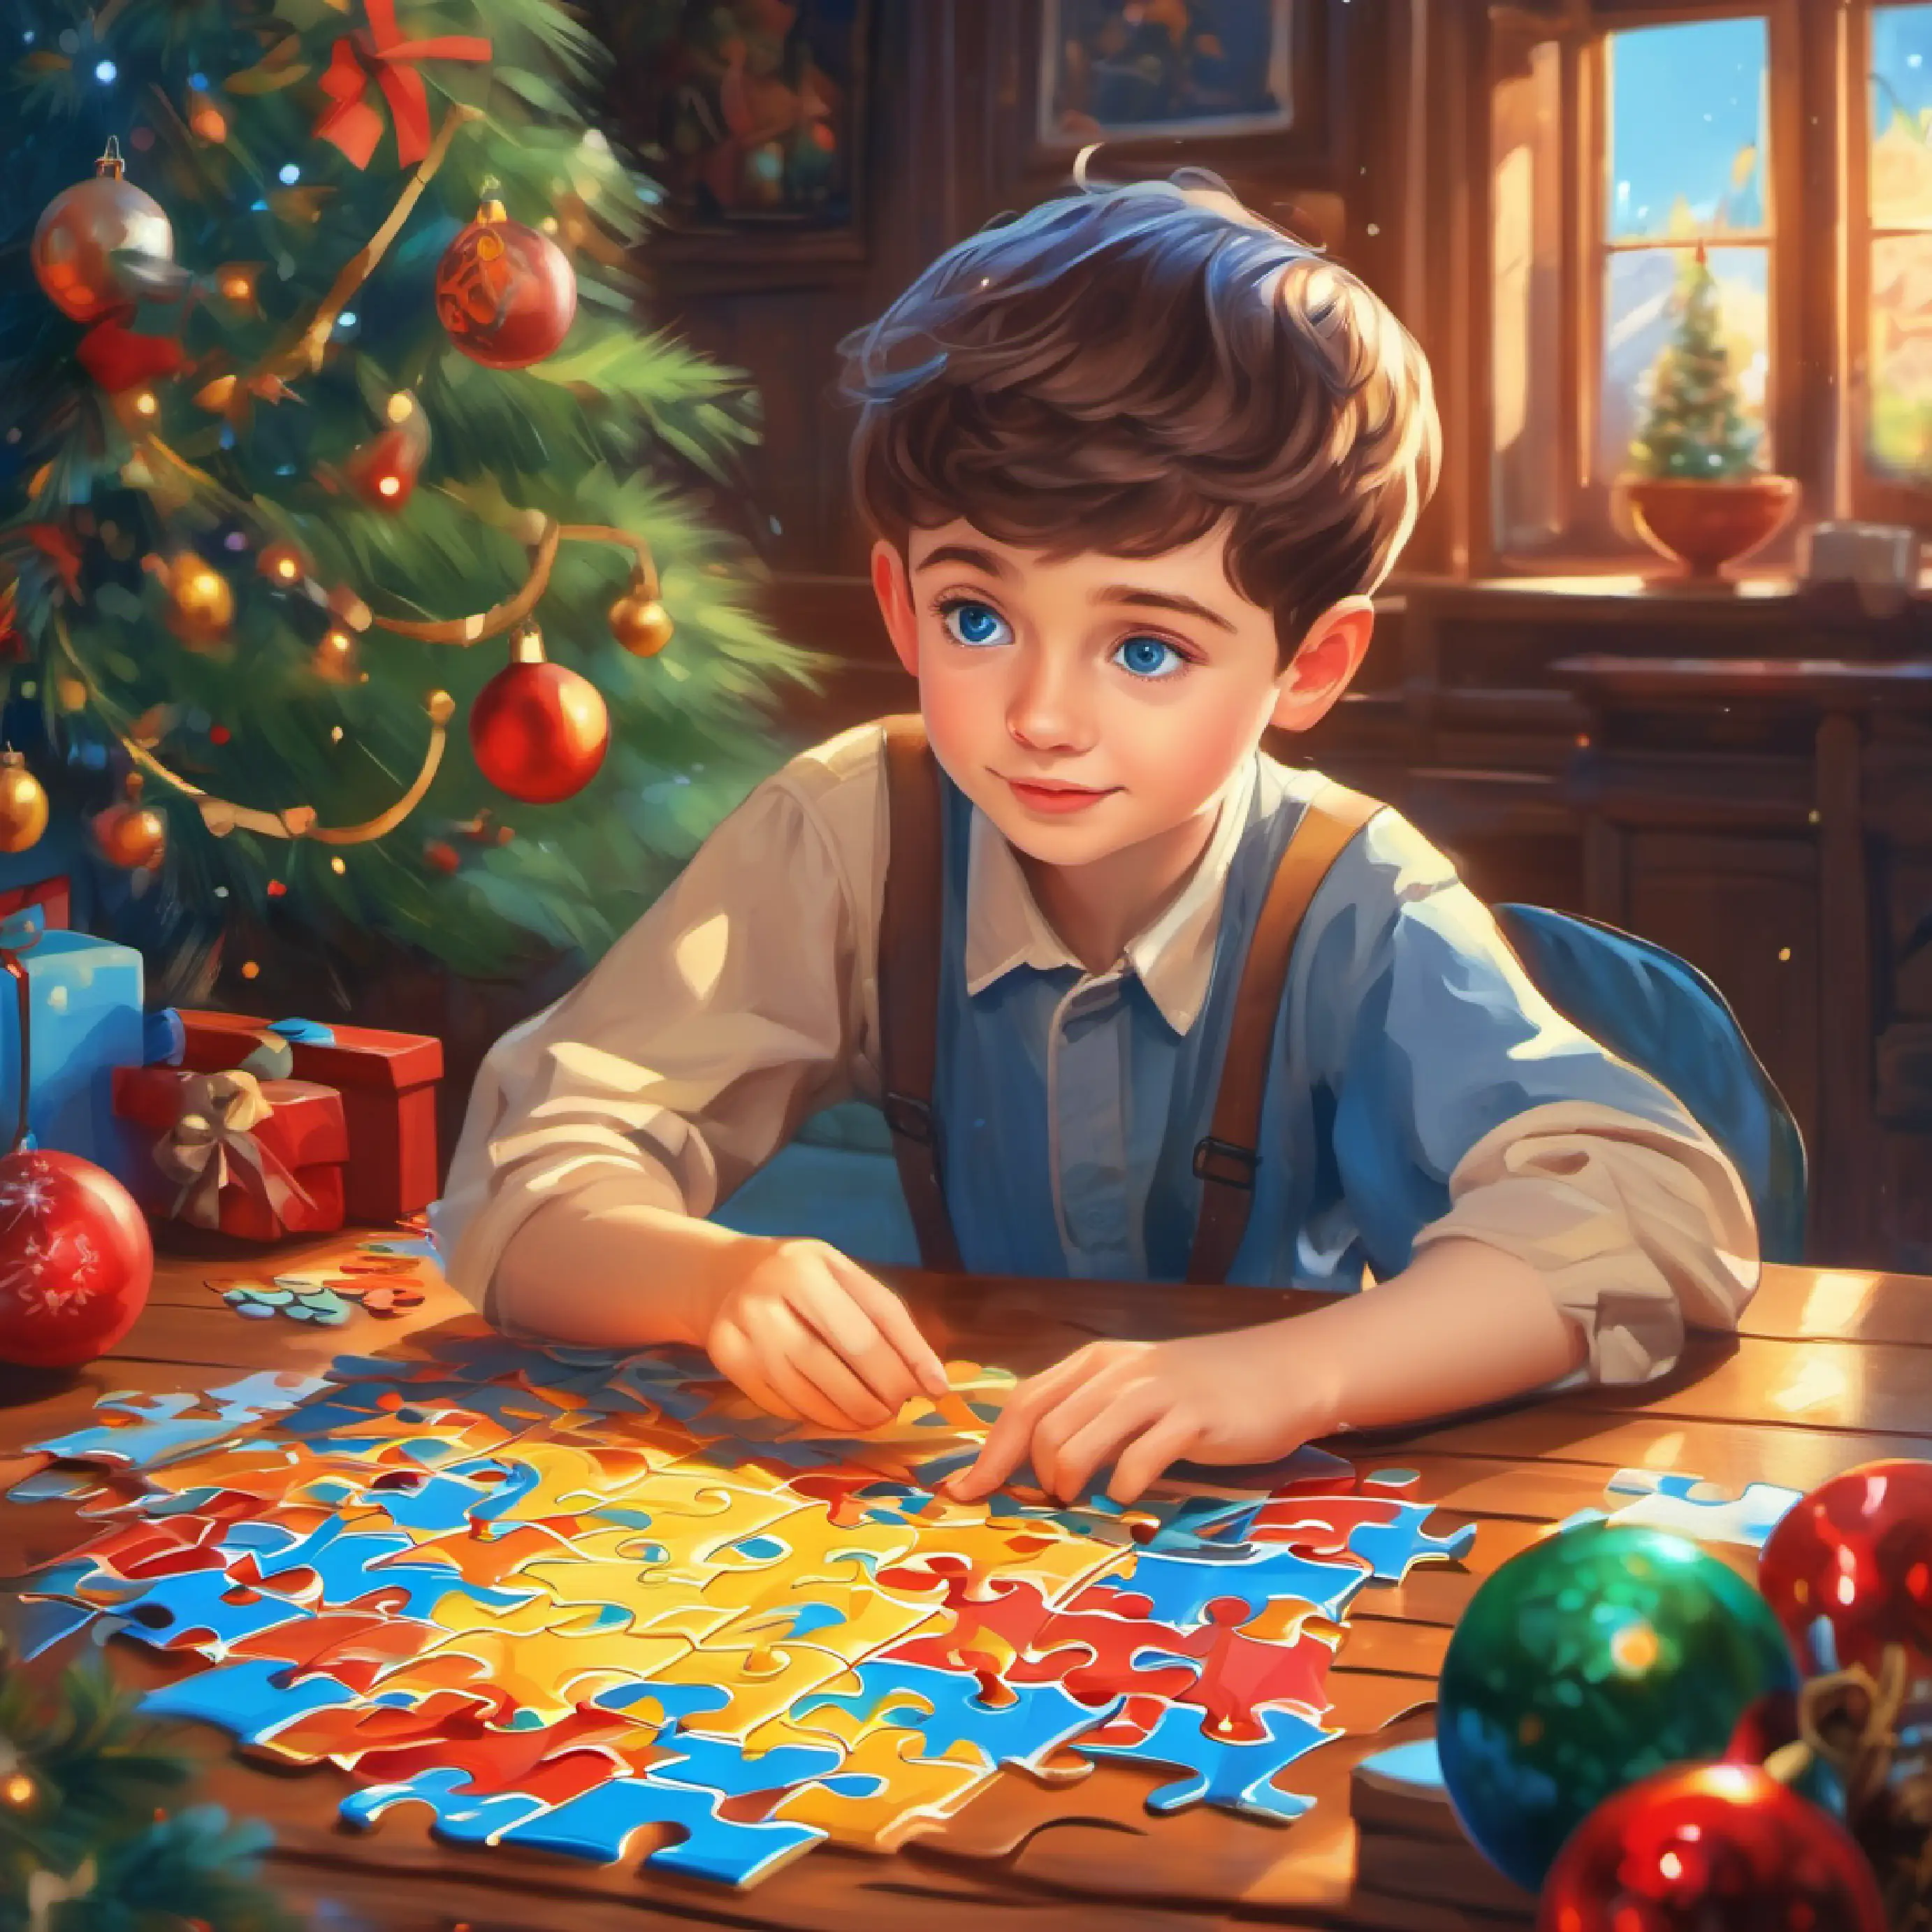 Young boy, short hair, pale skin, blue eyes receives a puzzle, setting activity